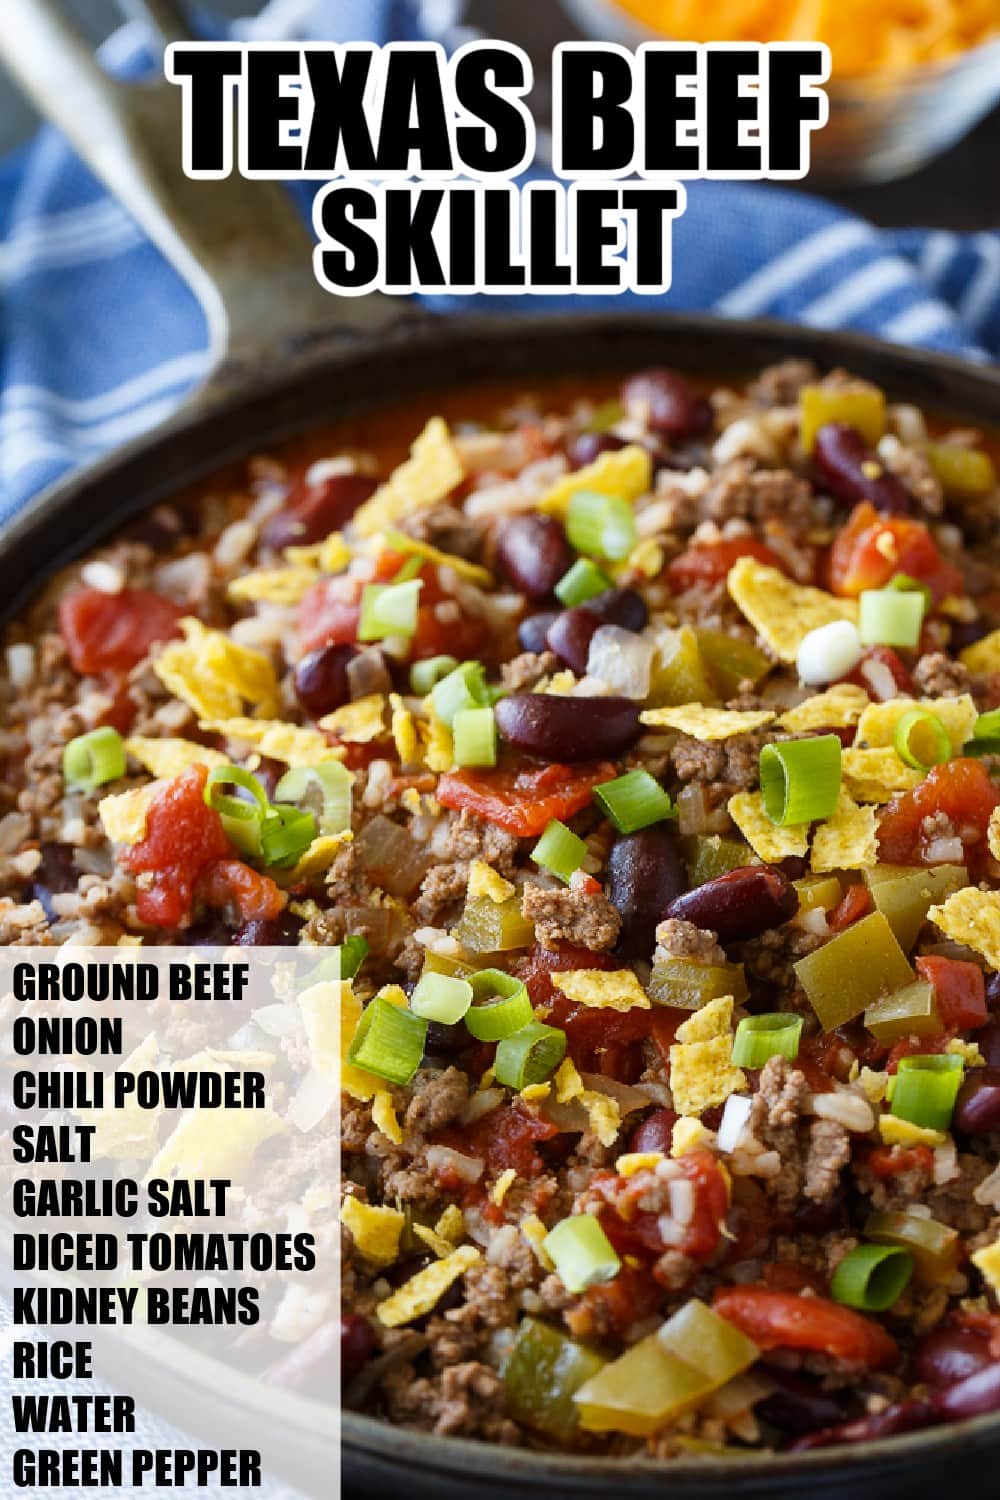 An image displaying a texas beef skillet dish in a black pan, ideal for busy families, topped with chopped green peppers and tomatoes. Ingredients are listed on the left side.